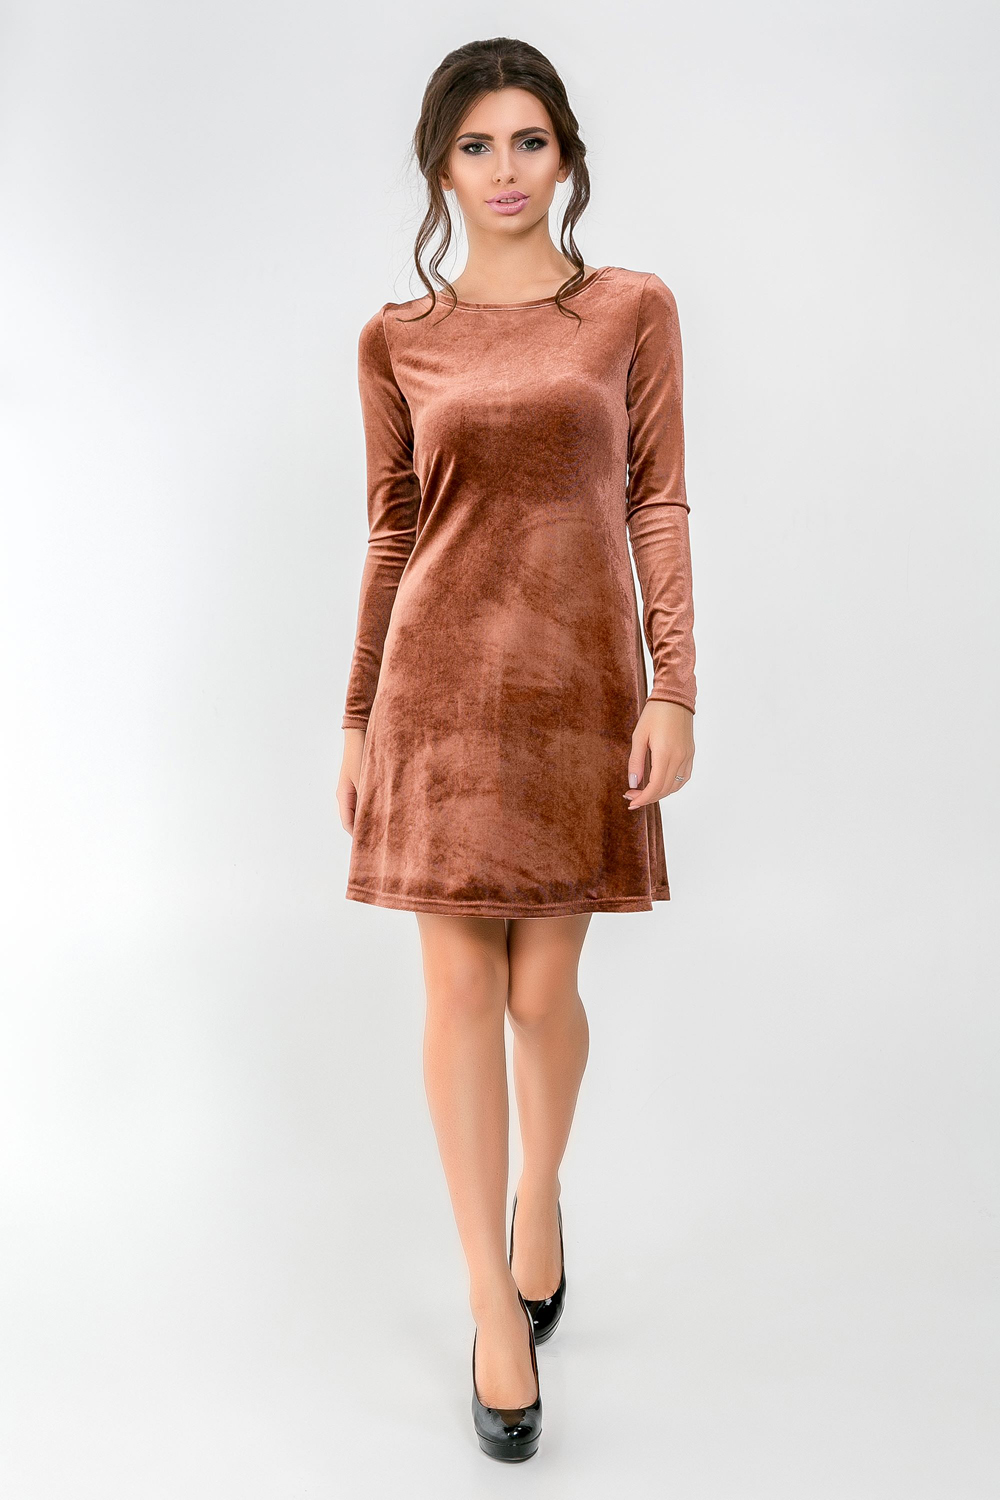 Velour dress with cut-out back and bow in bronze